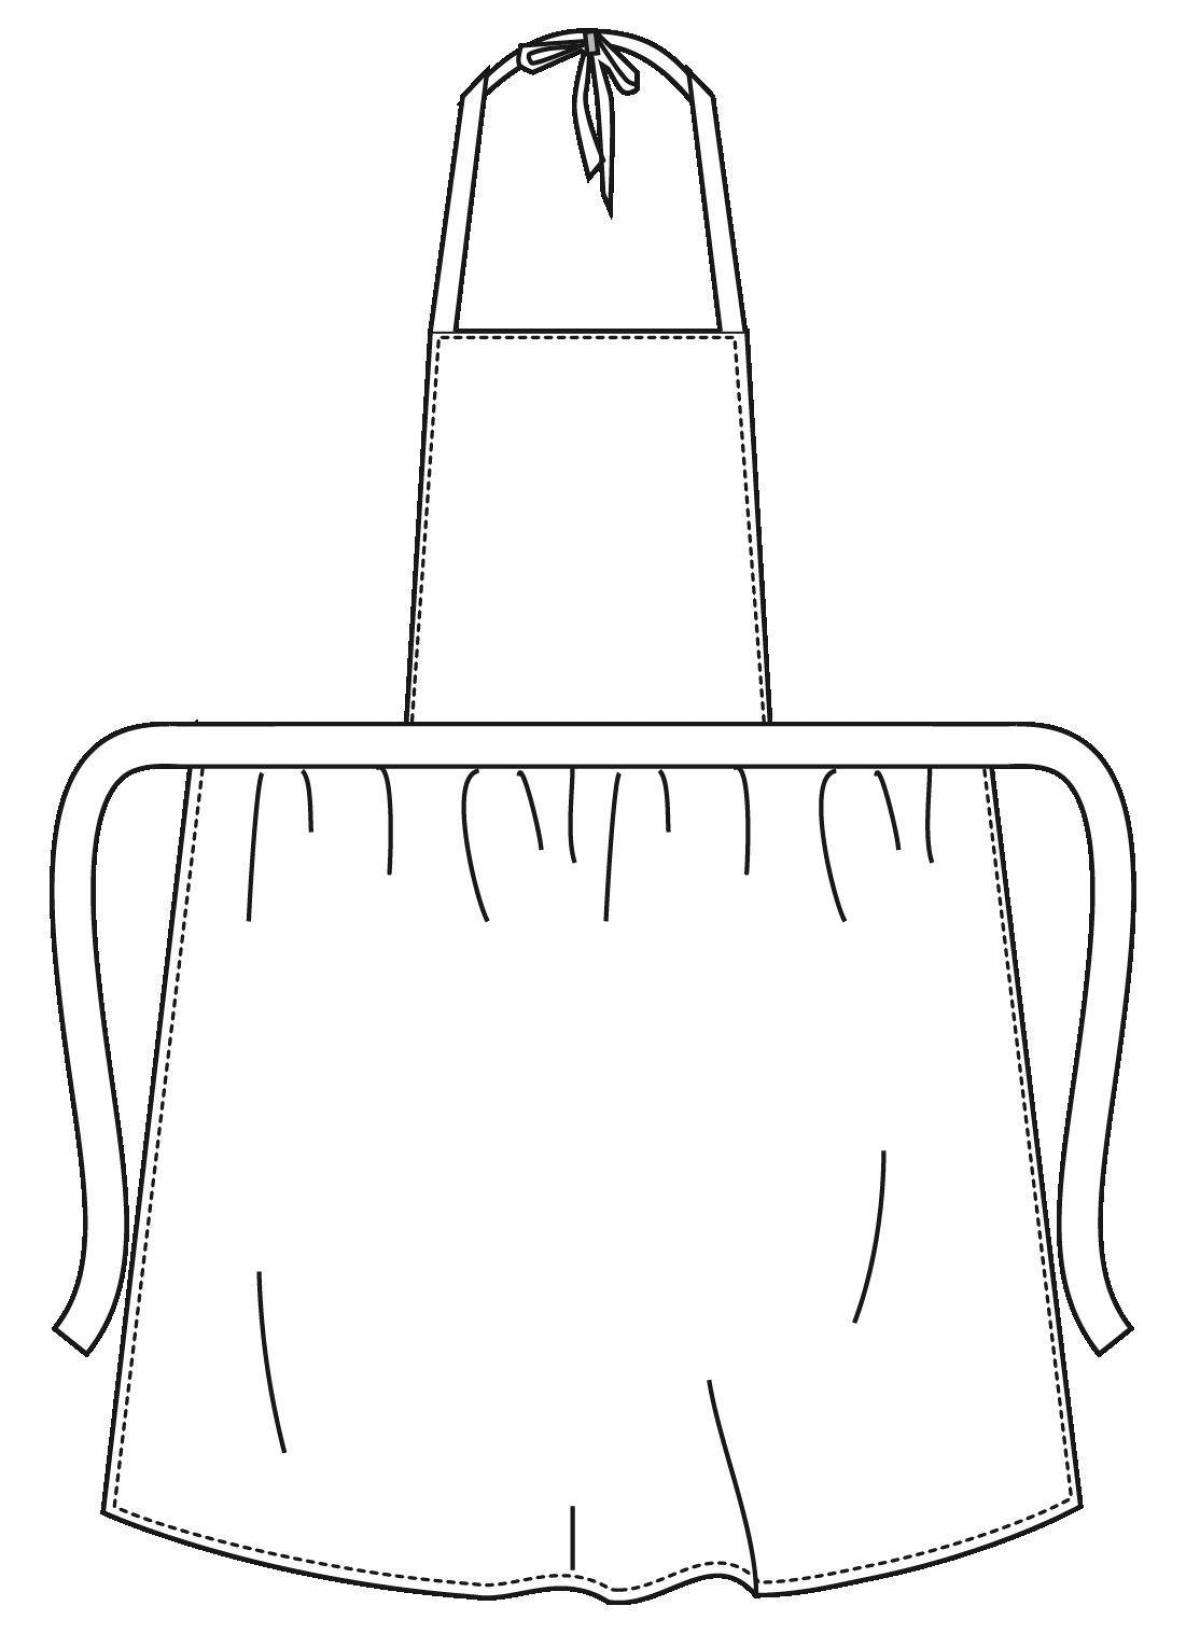 Adorable Chef's Apron Coloring Page for Kids